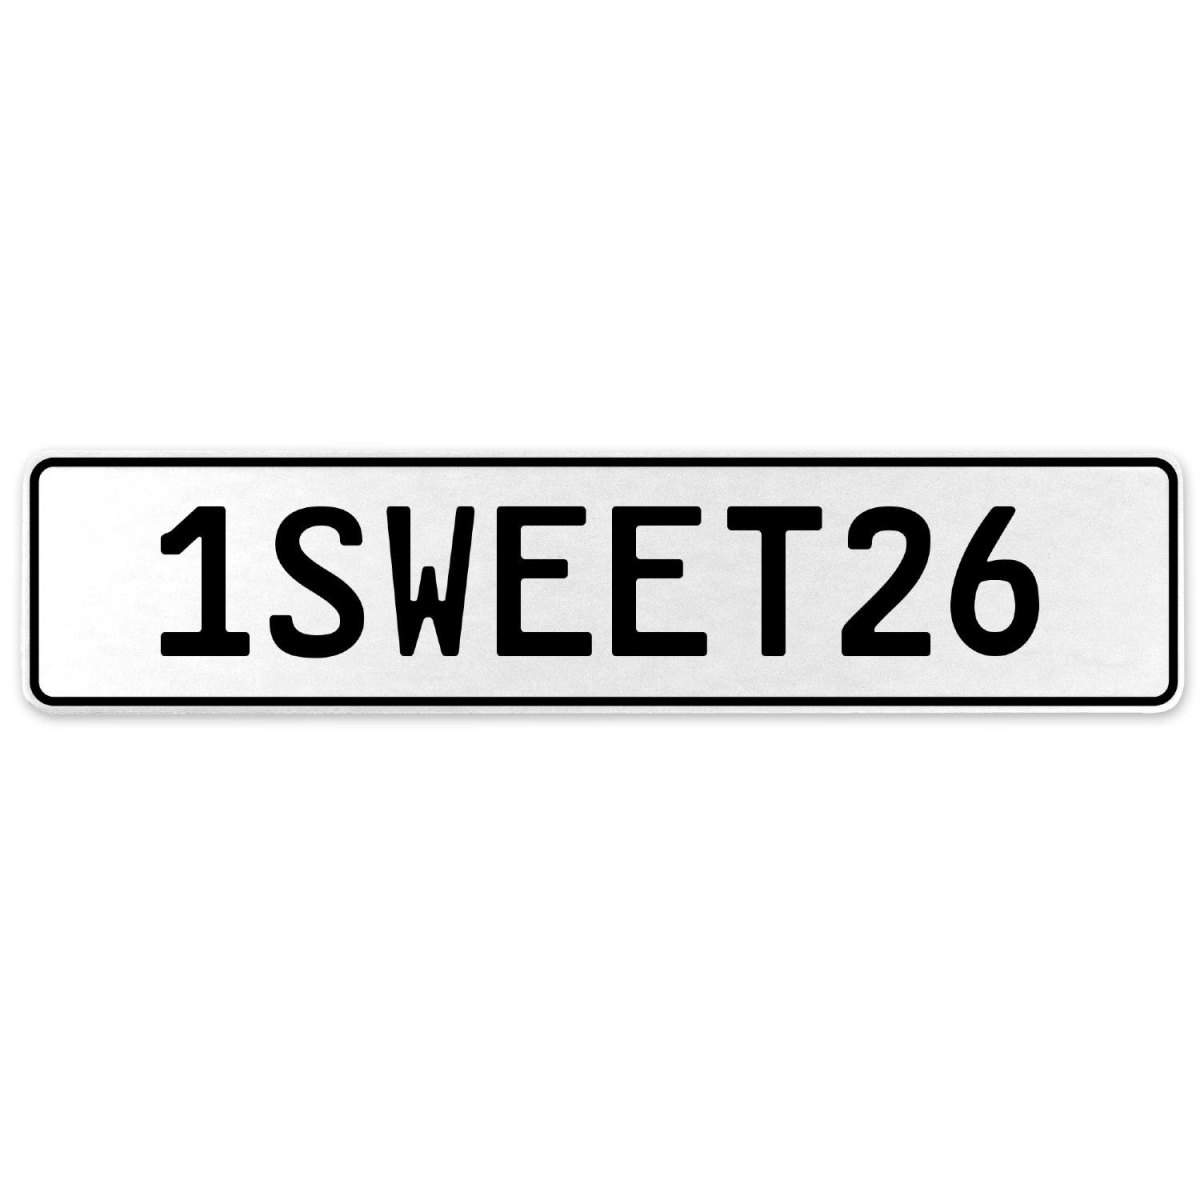 554227 1sweet26 - White Aluminum Street Sign Mancave Euro Plate Name Door Sign Wall